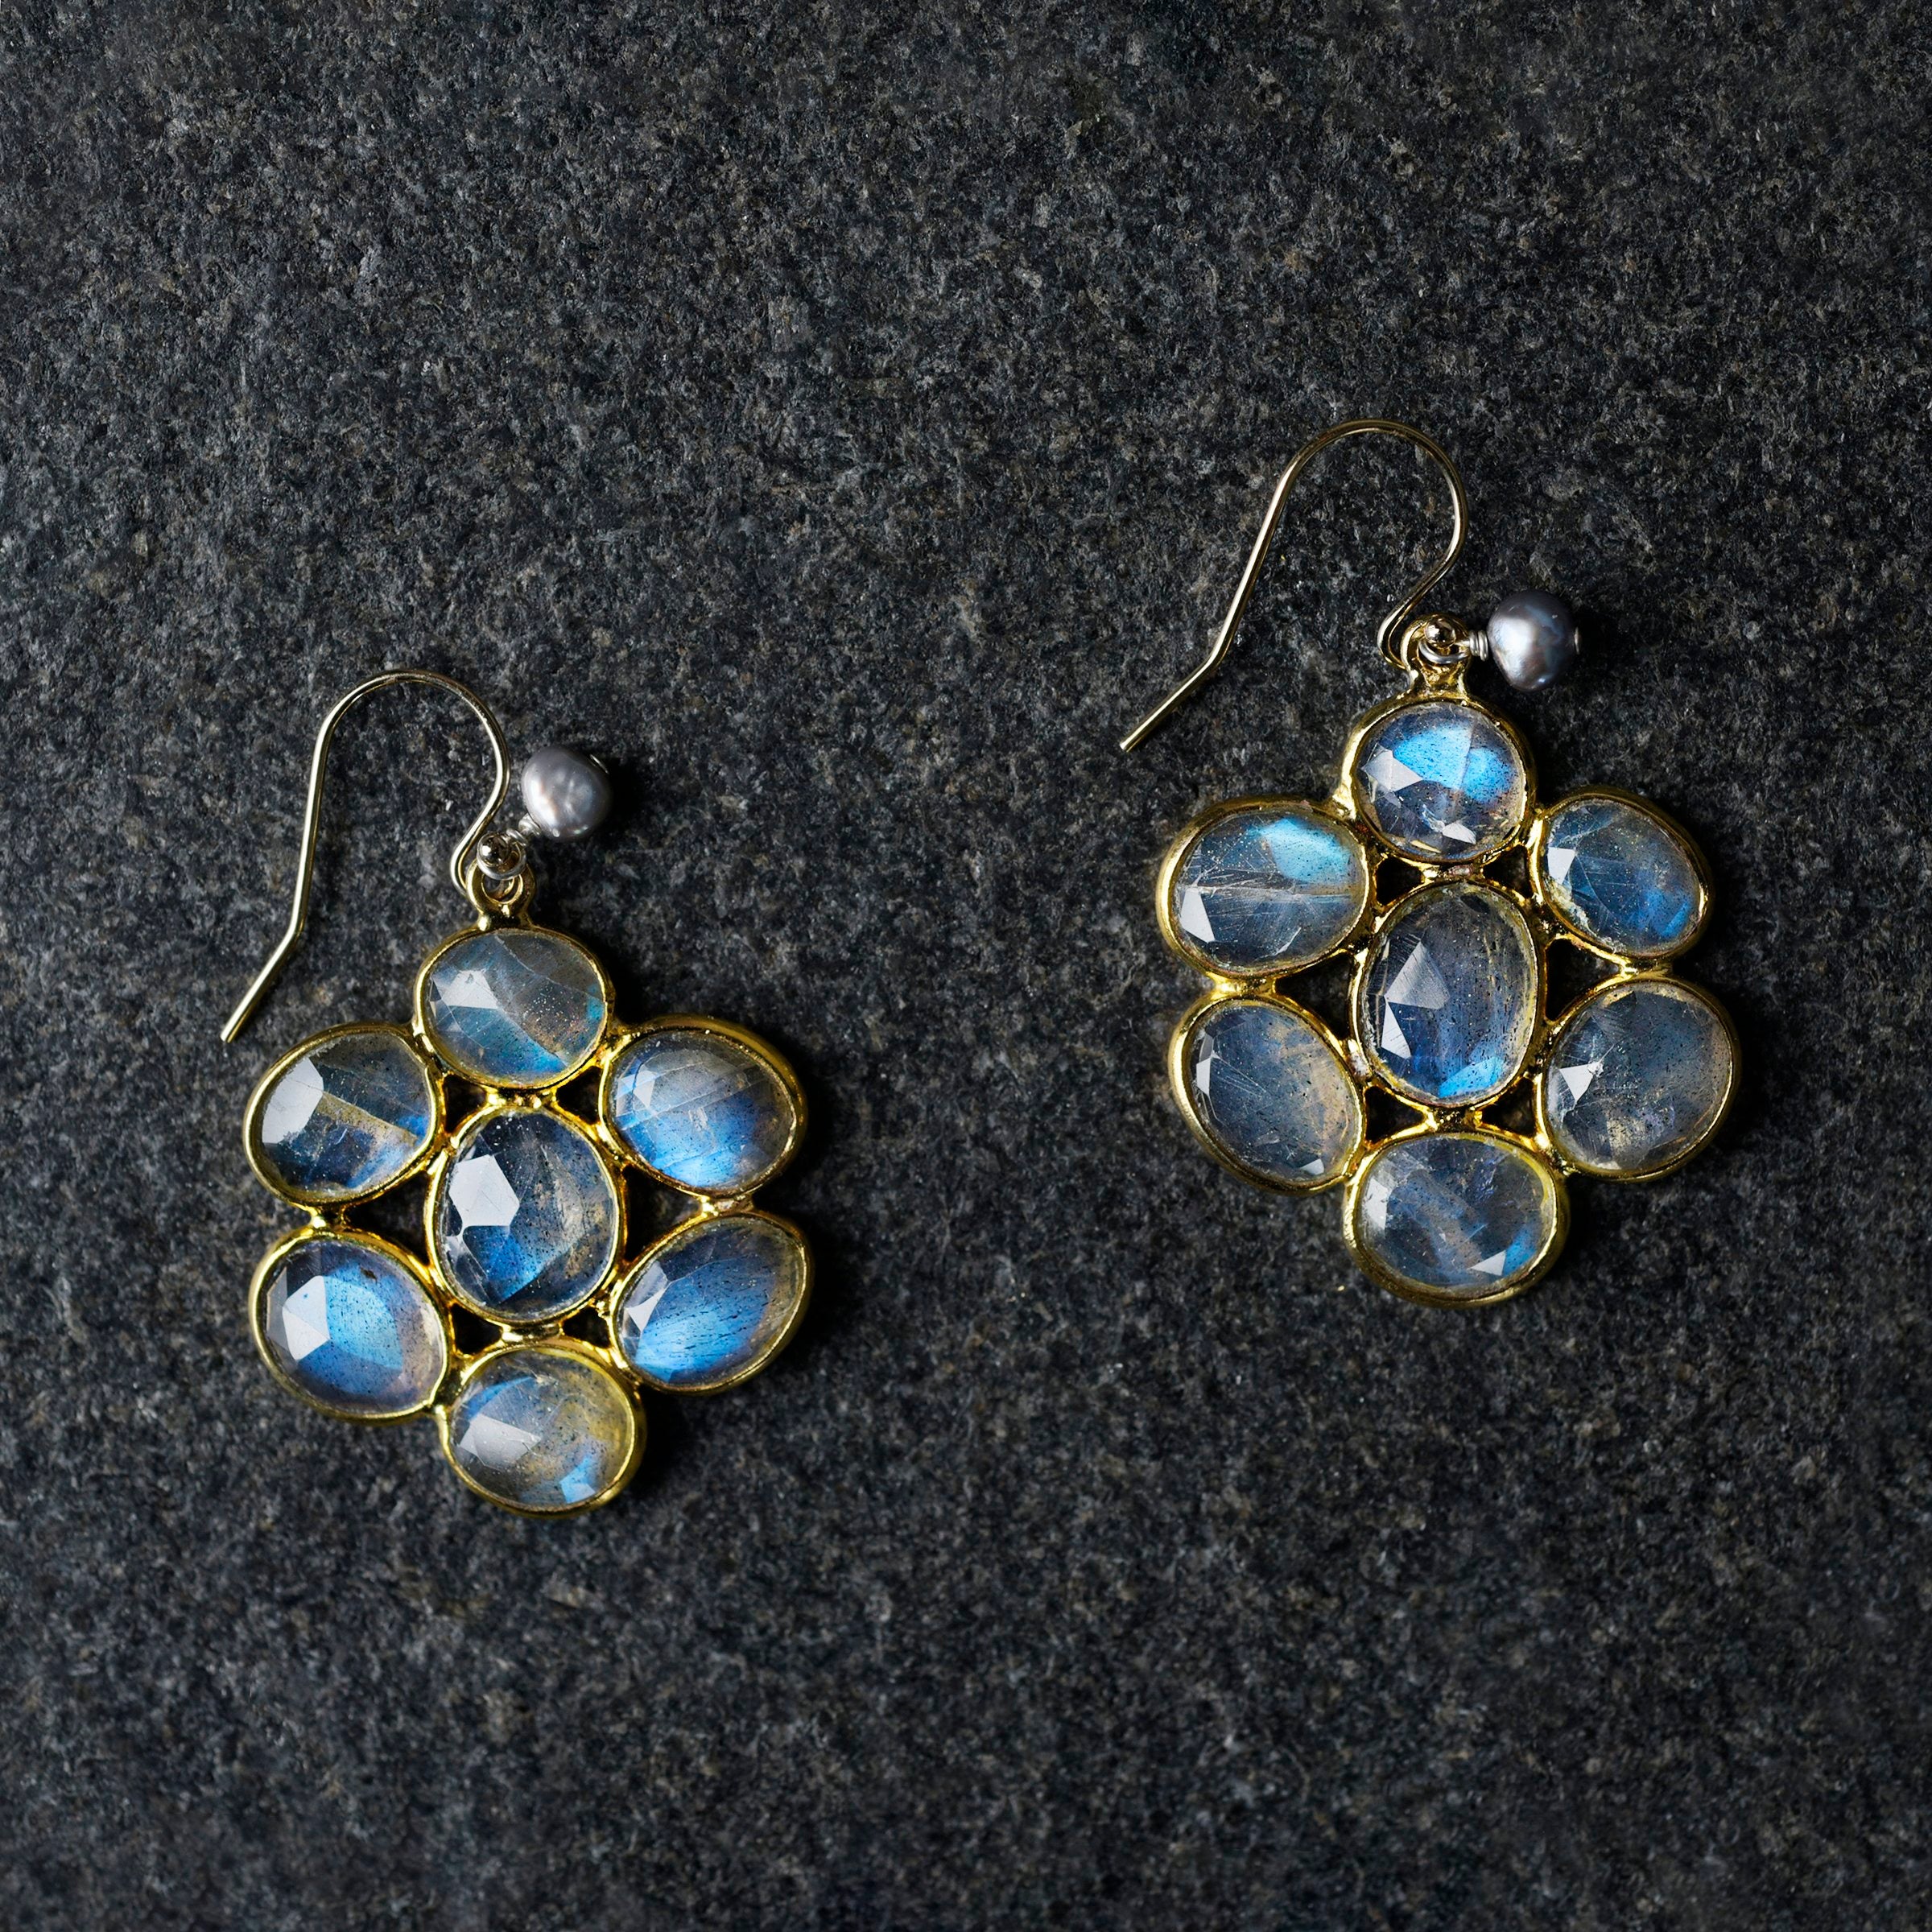 Faceted Turquoise Post Earrings